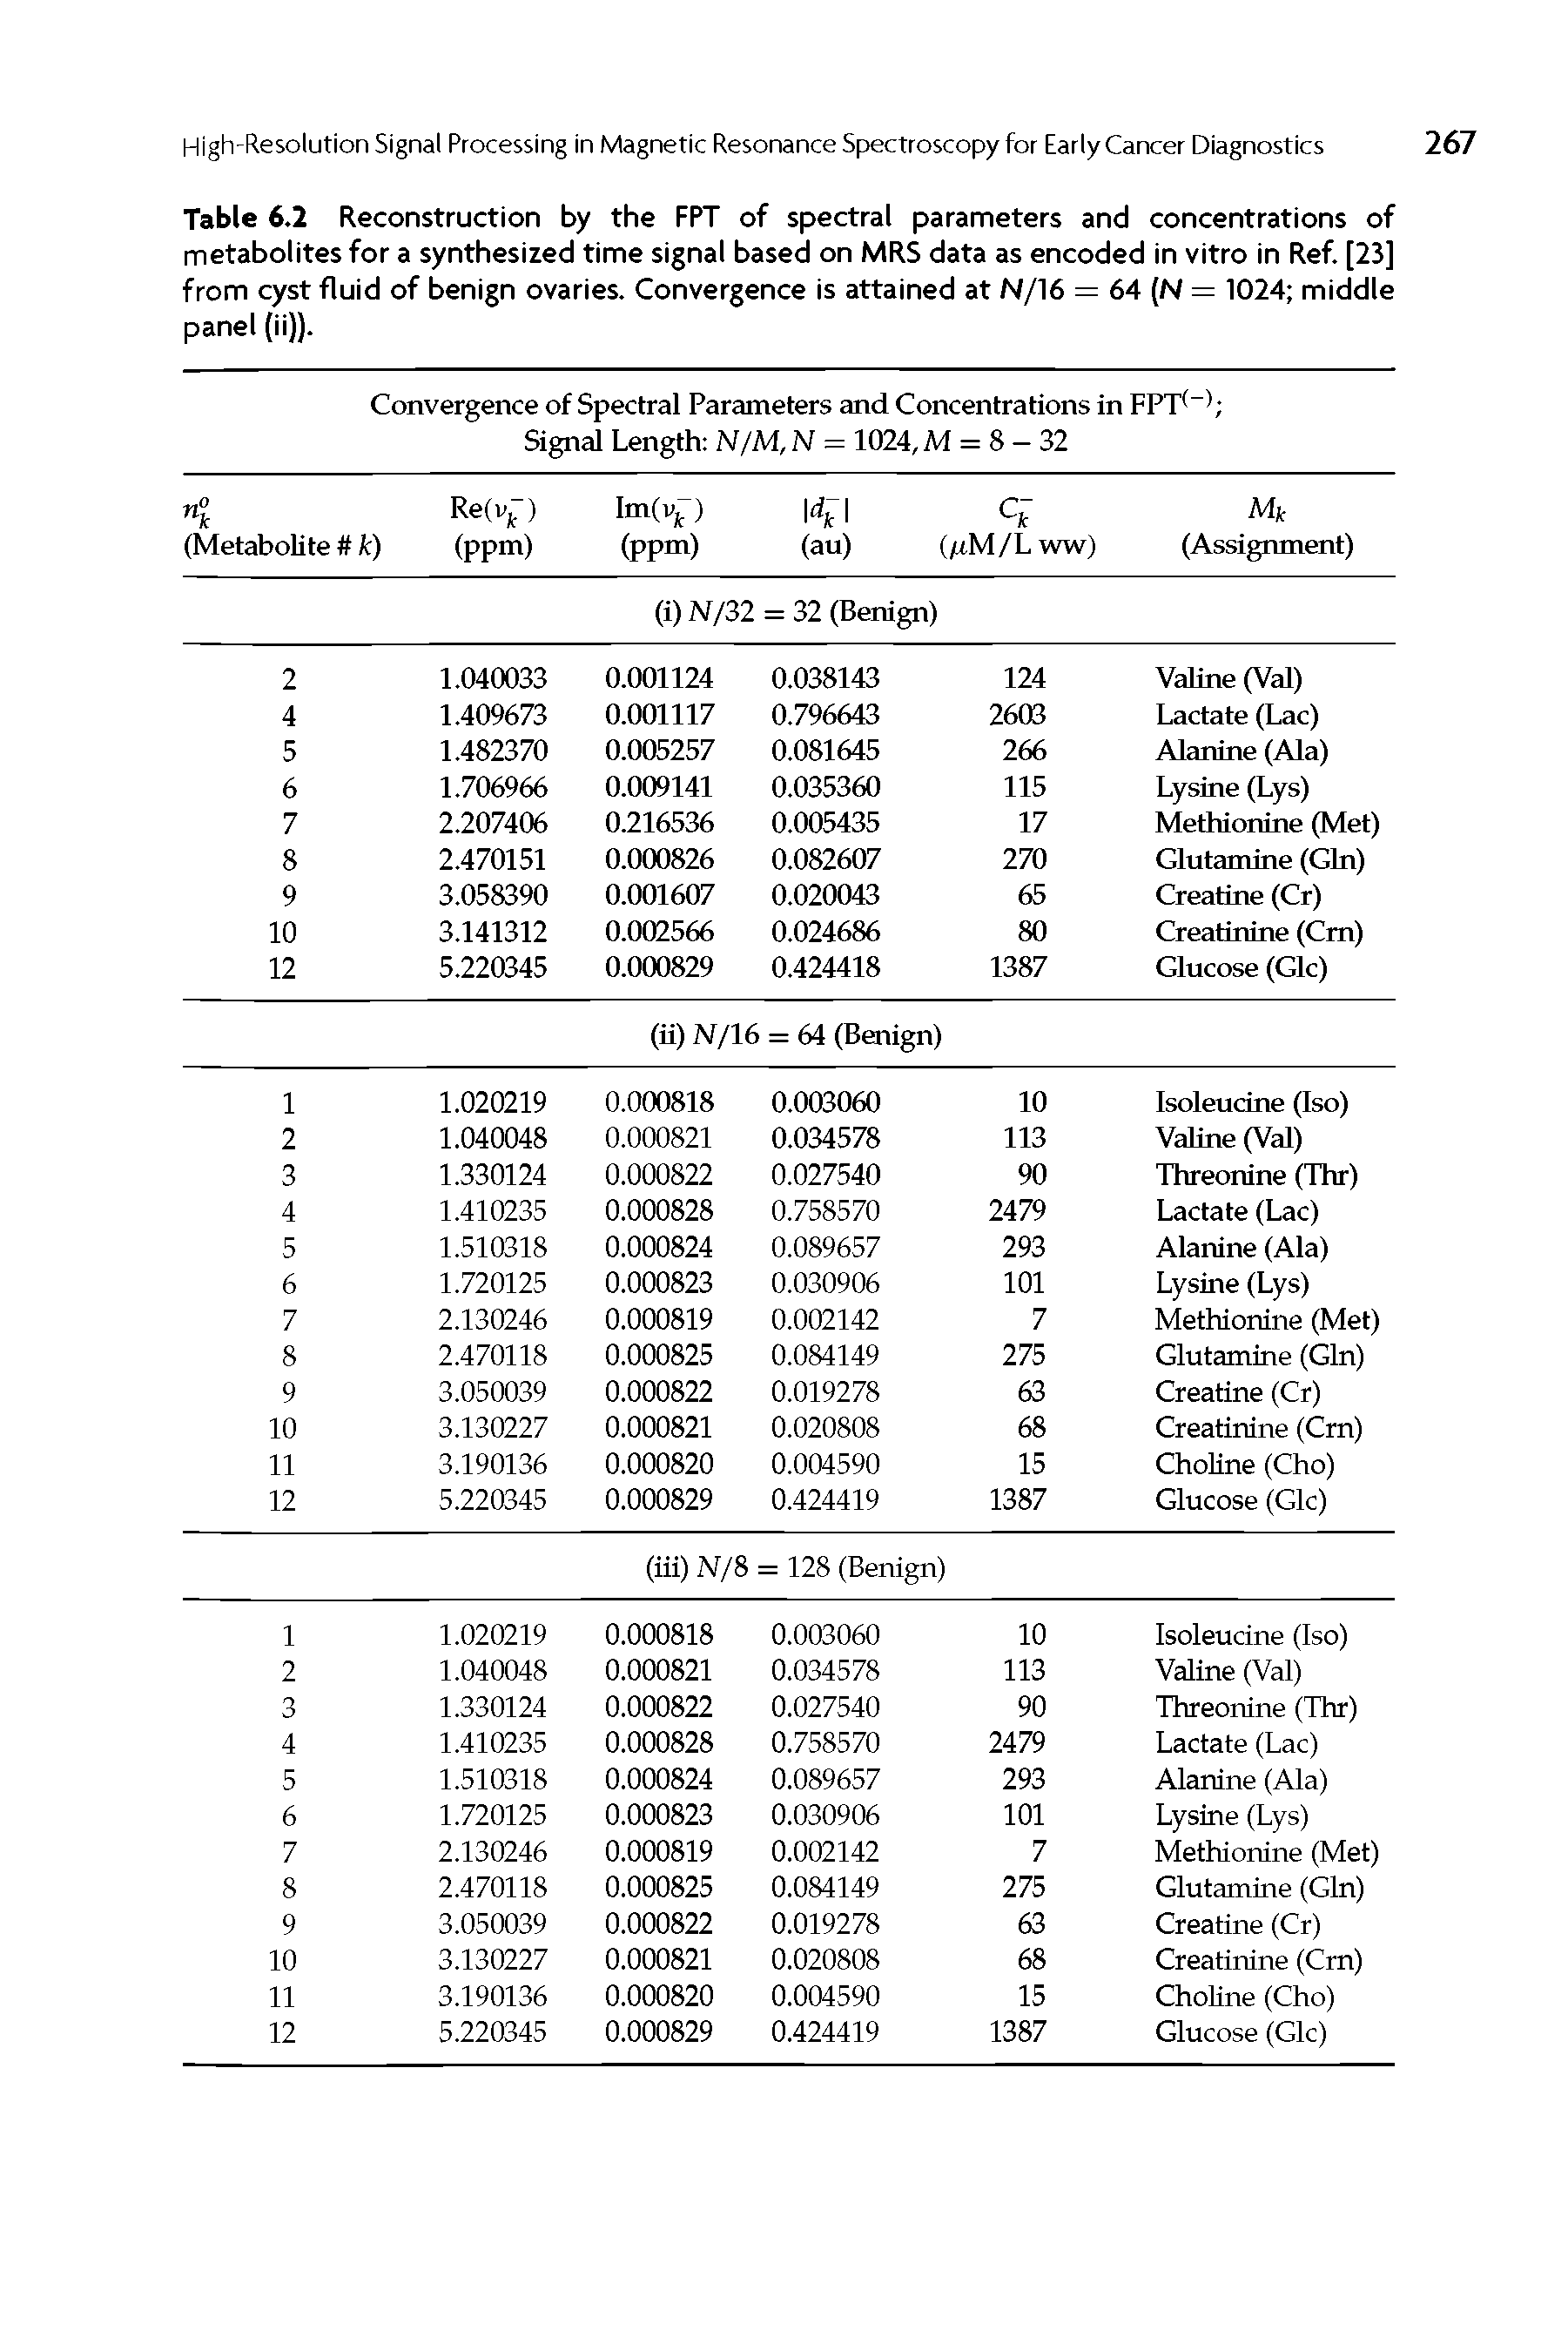 Table 6.2 Reconstruction by the FPT of spectral parameters and concentrations of metabolites for a synthesized time signal based on MRS data as encoded in vitro in Ref [23] from cyst fluid of benign ovaries. Convergence is attained at N/16 = 64 (N = 1024 middle panel (ii)).